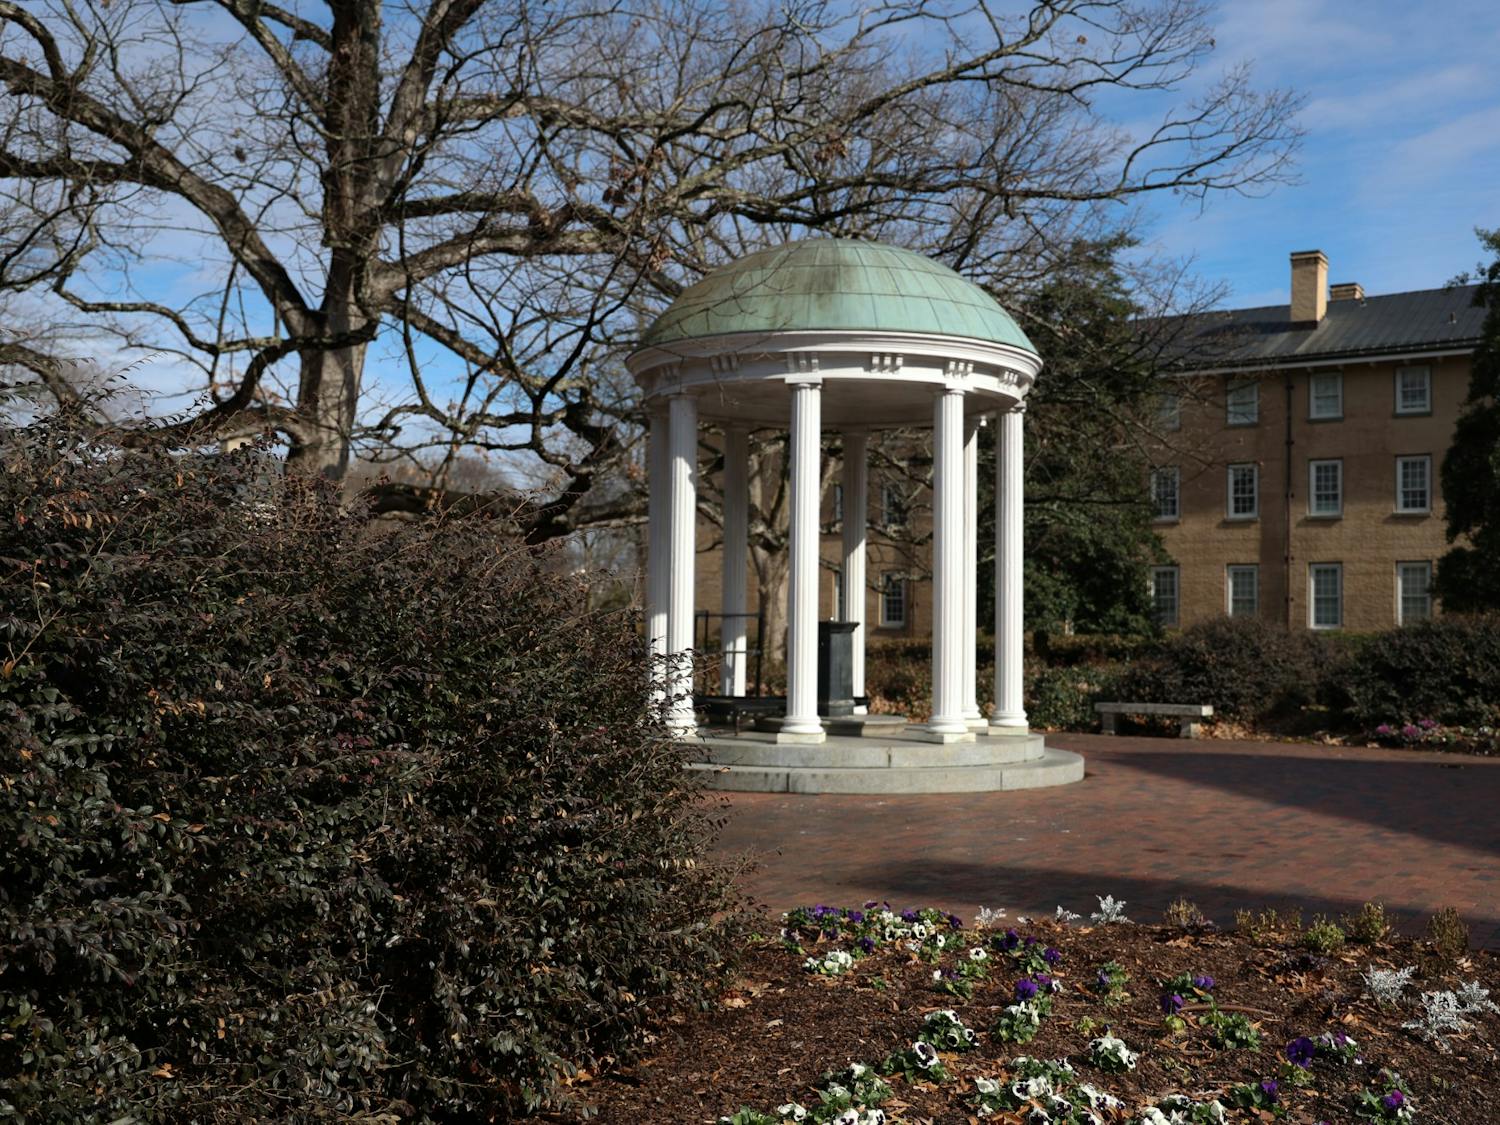 The Old Well is pictured on Jan. 30, 2023.